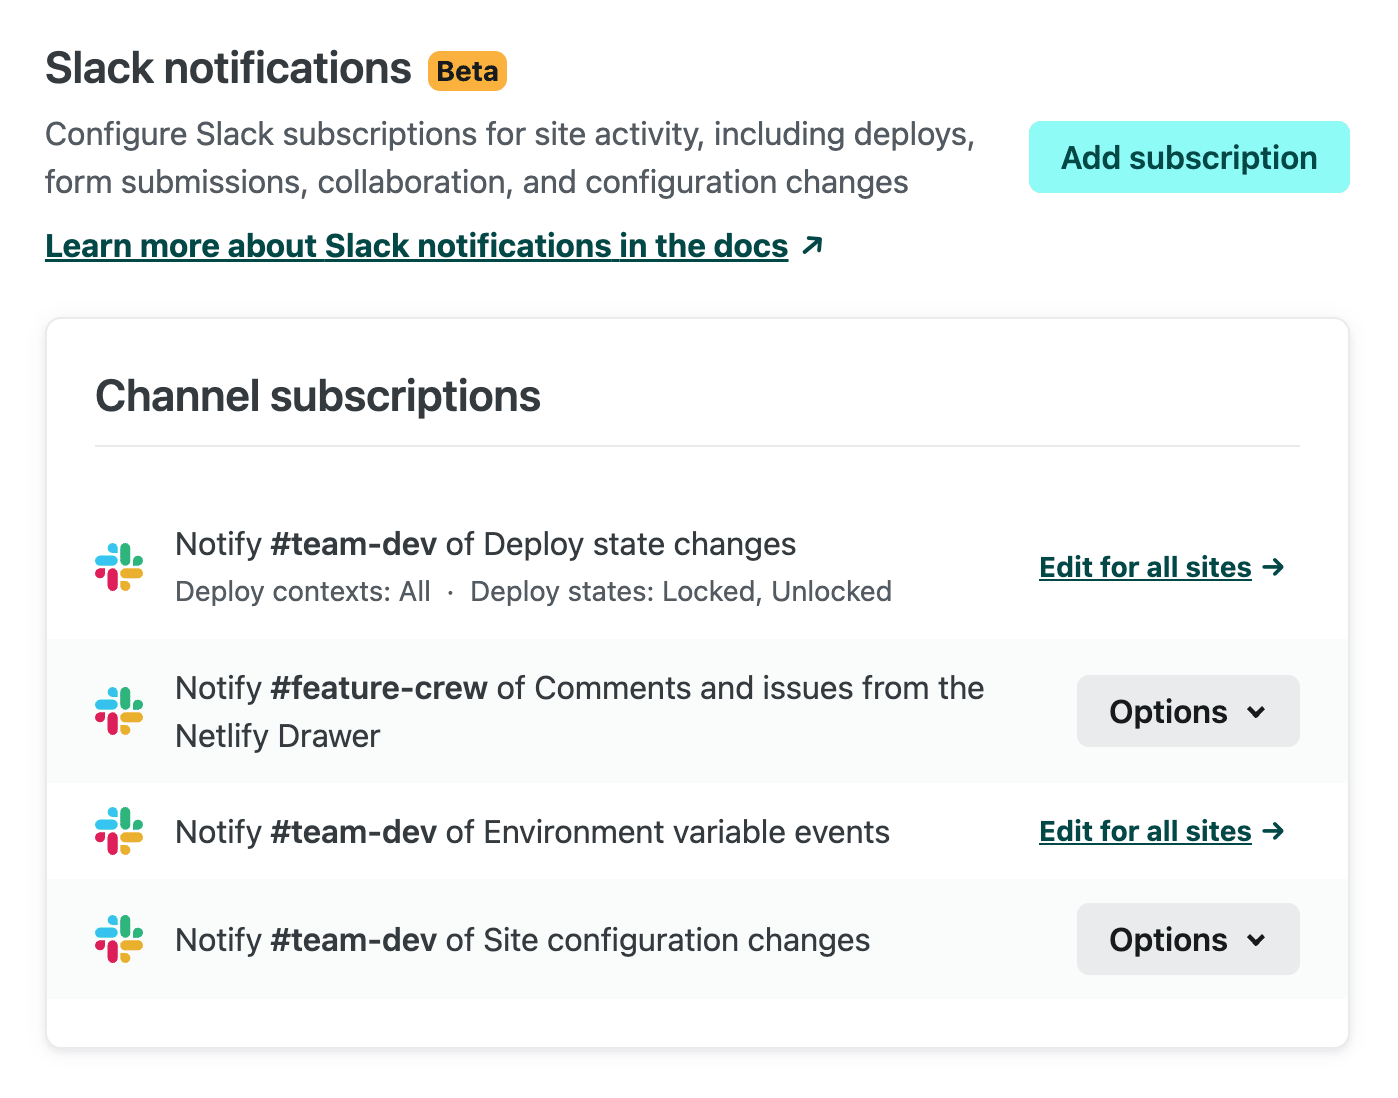 This site's Slack notifications include 2 site-specific subscriptions and 2 all-sites subscriptions.